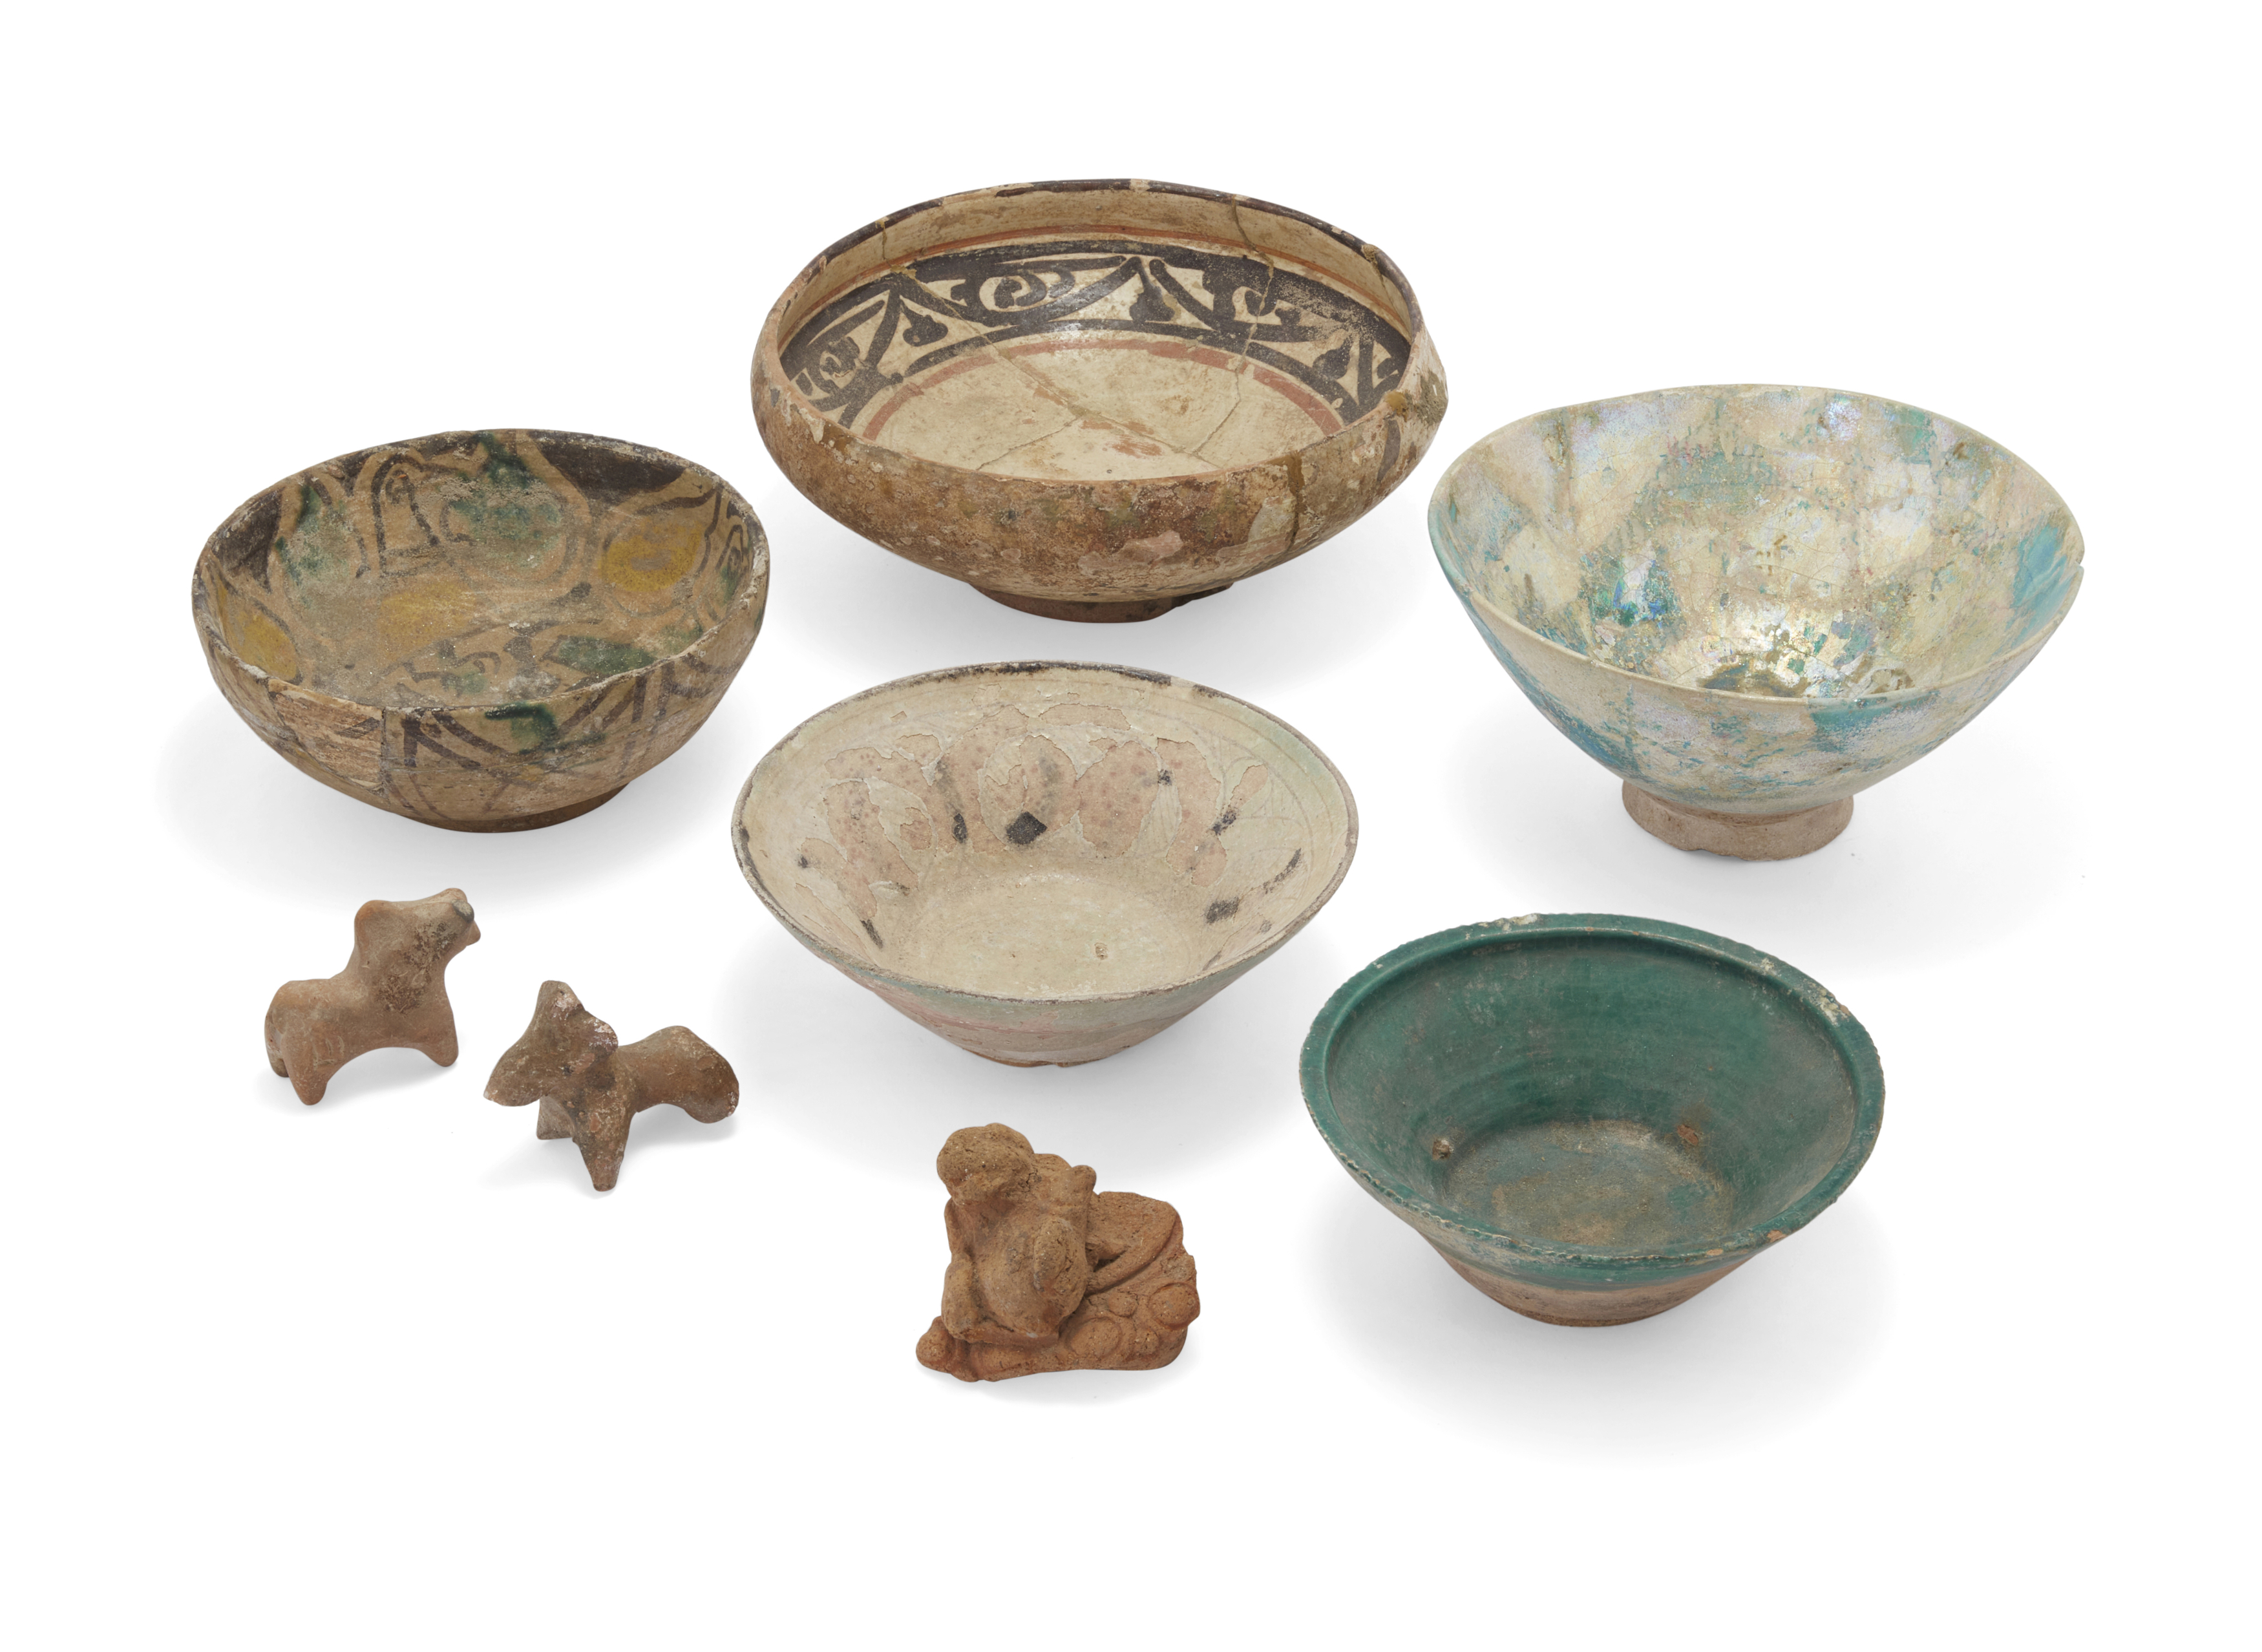 Five pottery bowls, Iran, 10th-12th century together with a small group of terracotta figures ... - Image 2 of 2